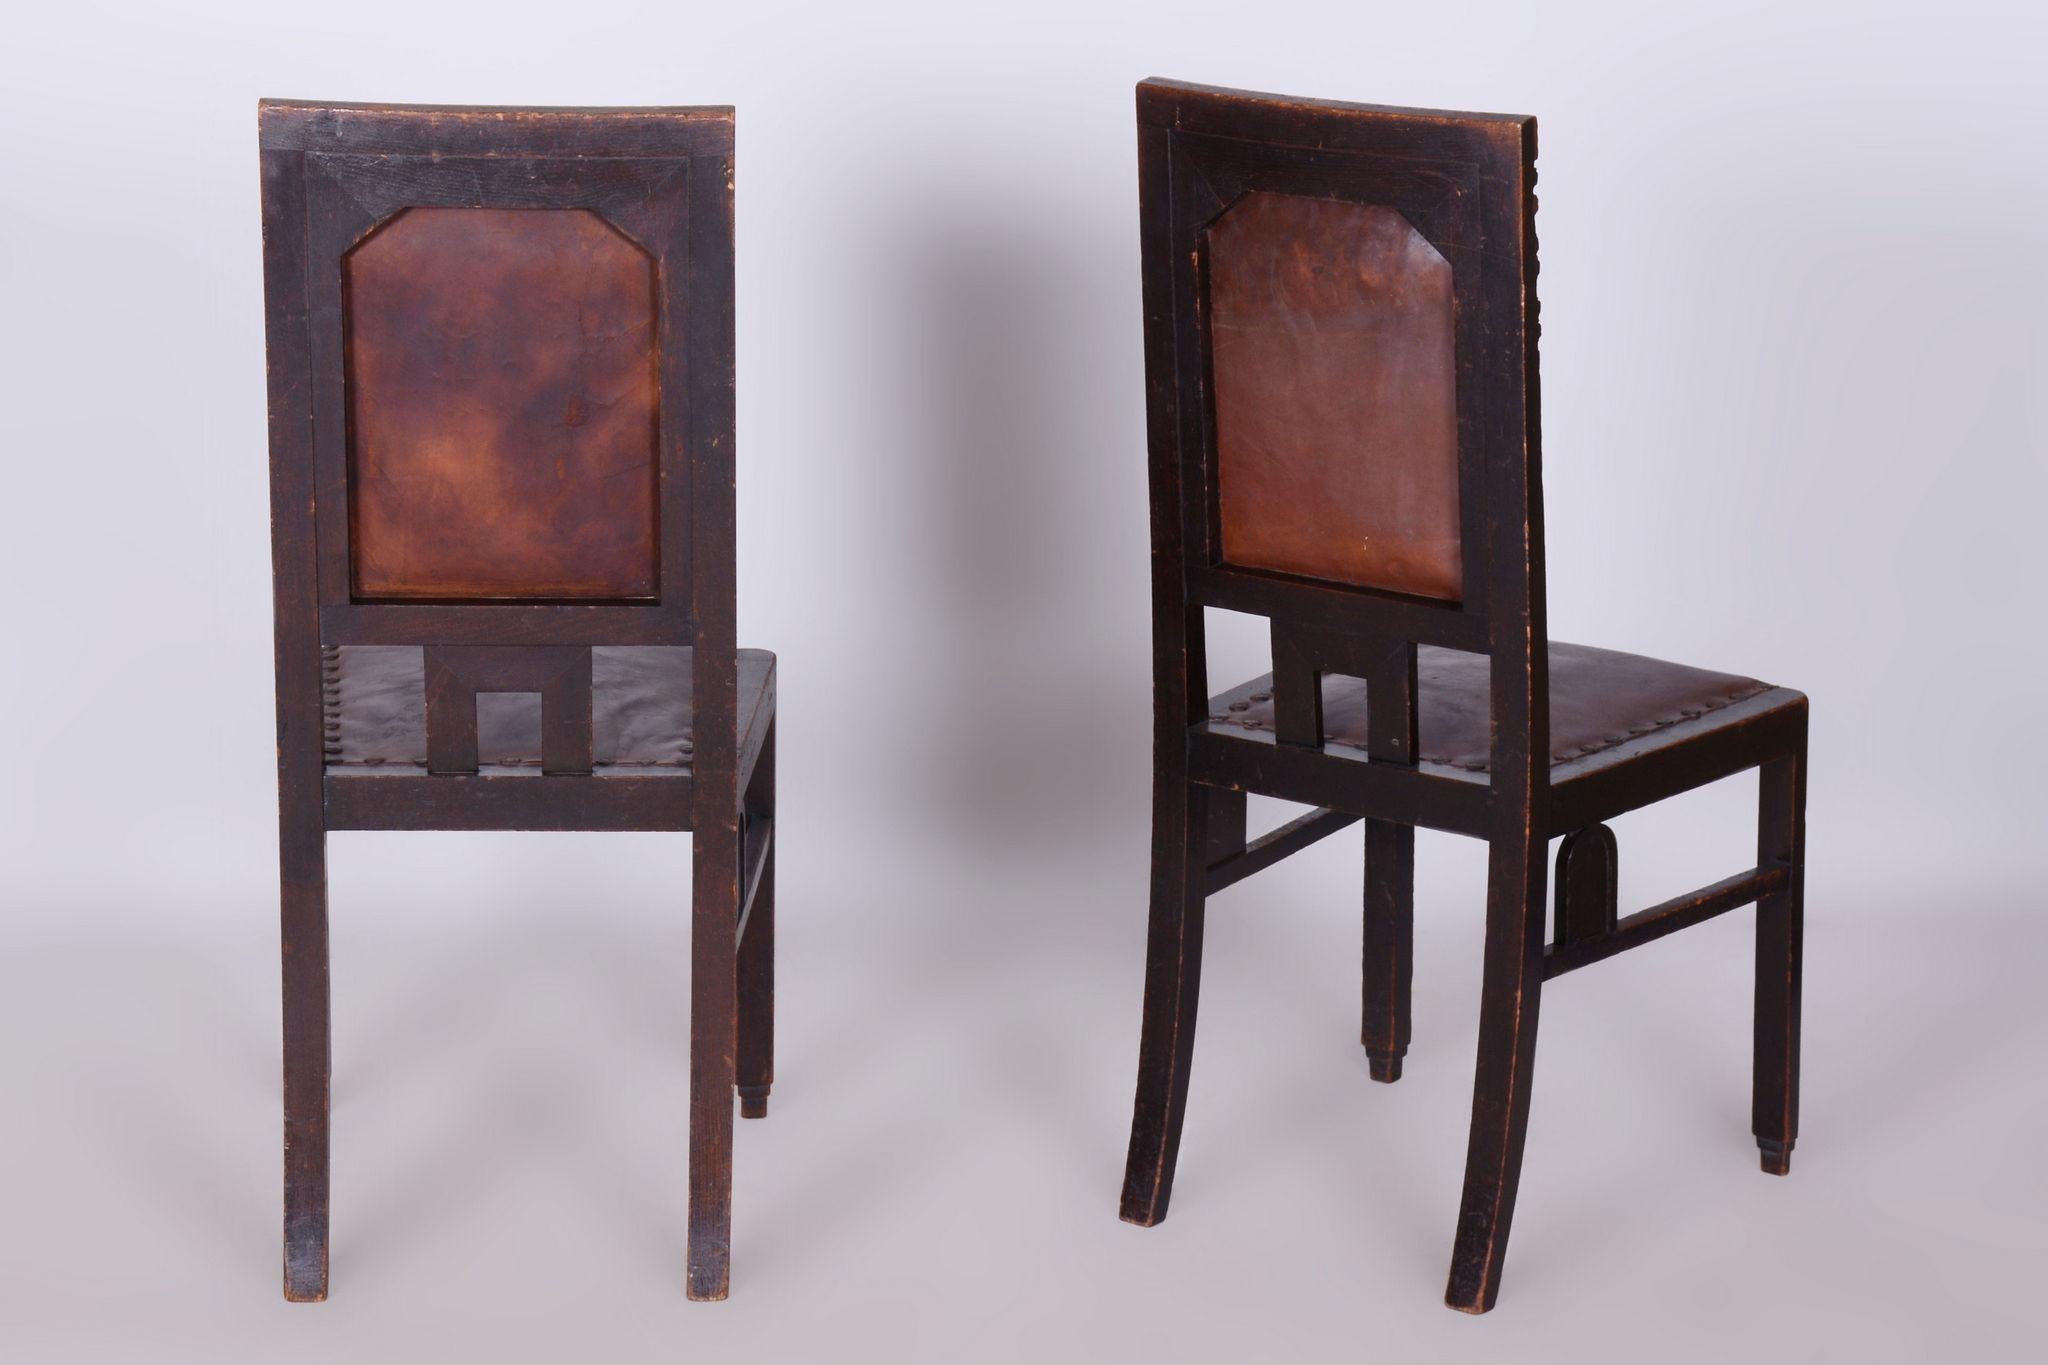 Set of Four Cubist Chairs, by Josef Gočár, Solid Oak, Red Leather, Czech, 1910s For Sale 5